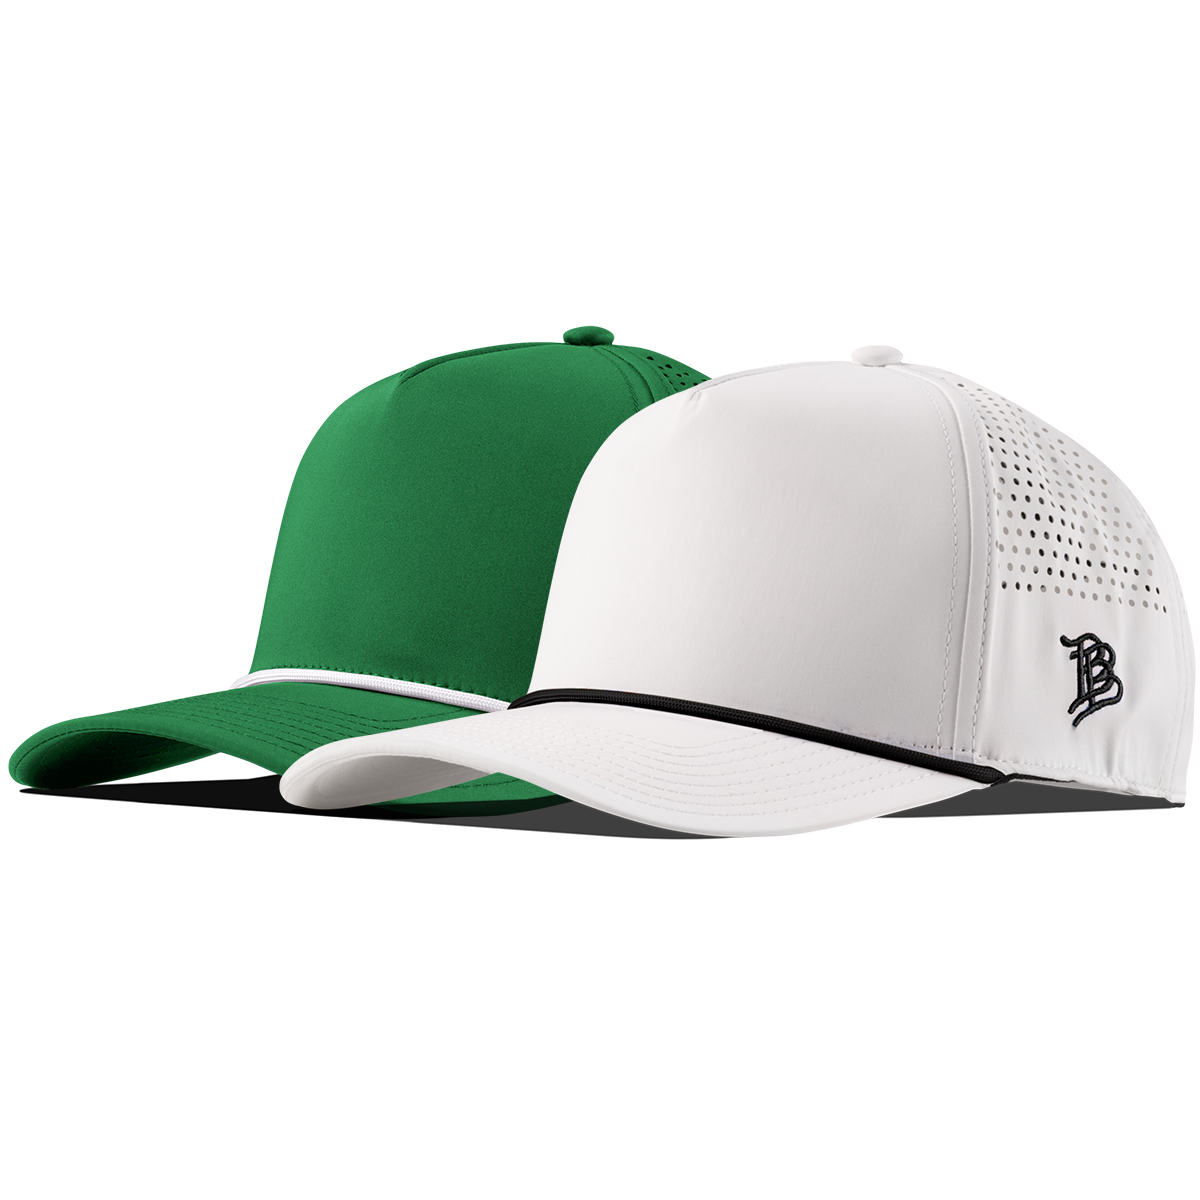 Bare Curved 5 Panel Rope 2-Pack White/Black + Kelly Green/White